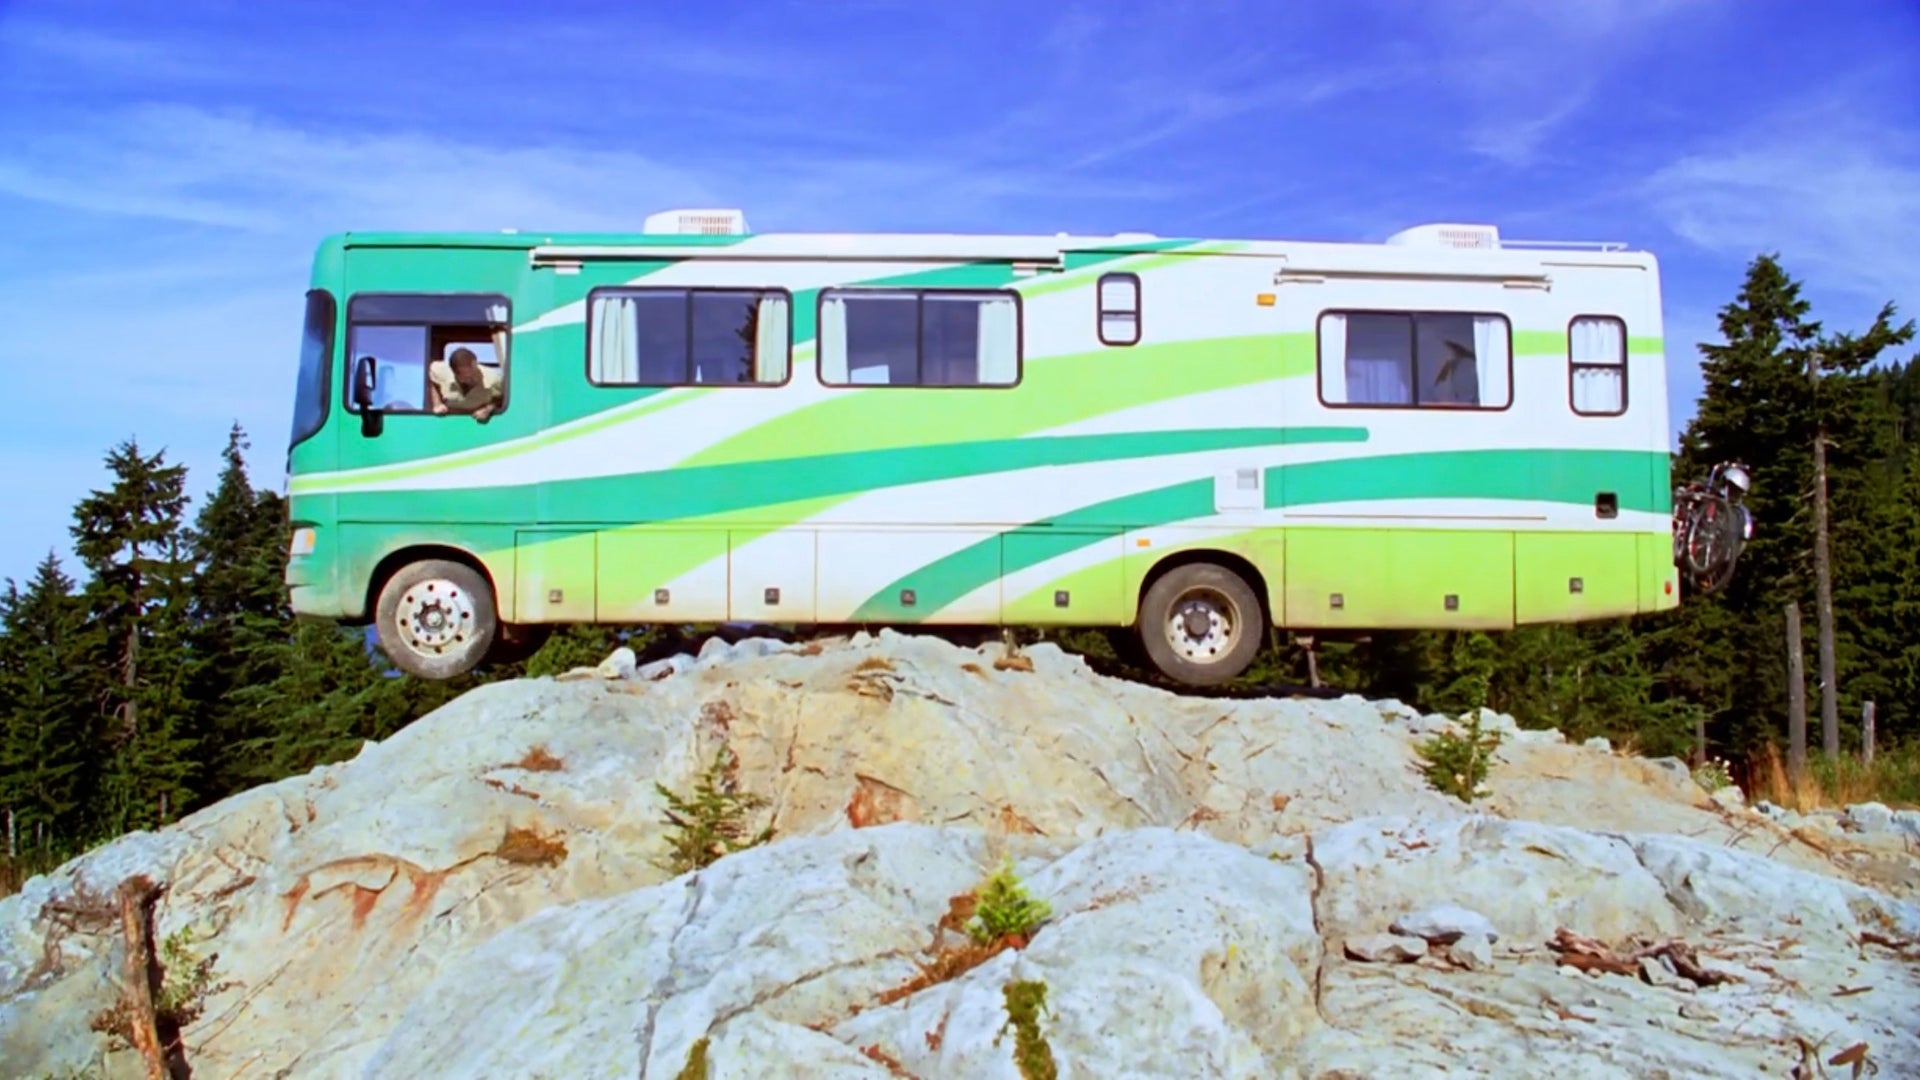 RV Rentals Up 650 Percent as Americans Plan Socially Distant Summer Vacations